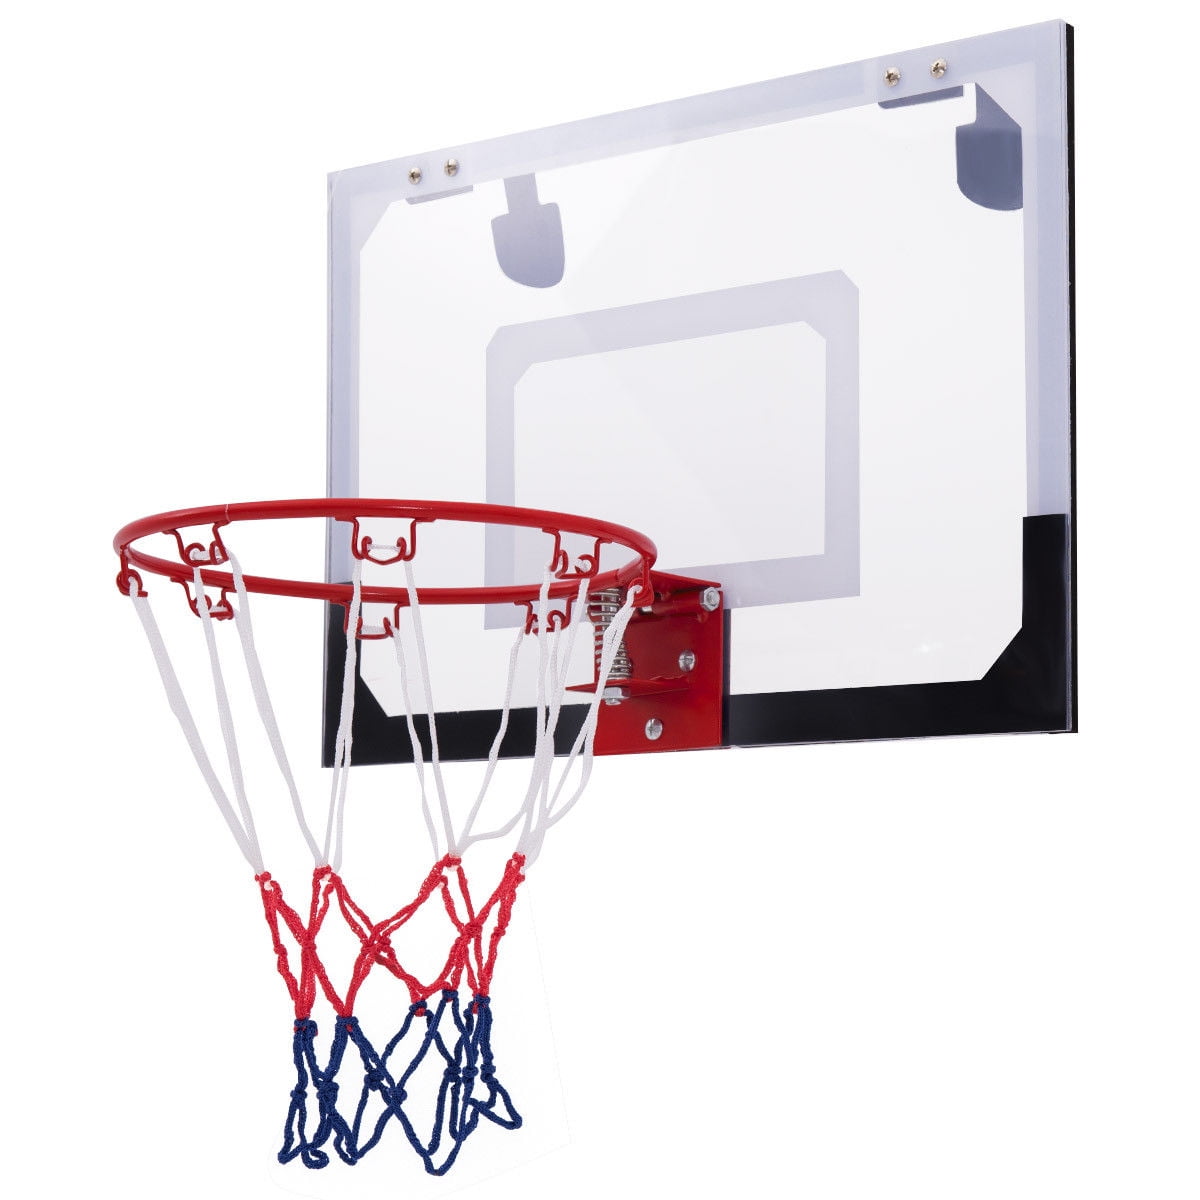 Portable Includes 5 Rubber Ball Mini Hoop Basketball Backboard 18 x 11 Polycarbonate Board Flexible Rim and Net round21 Over The Door 